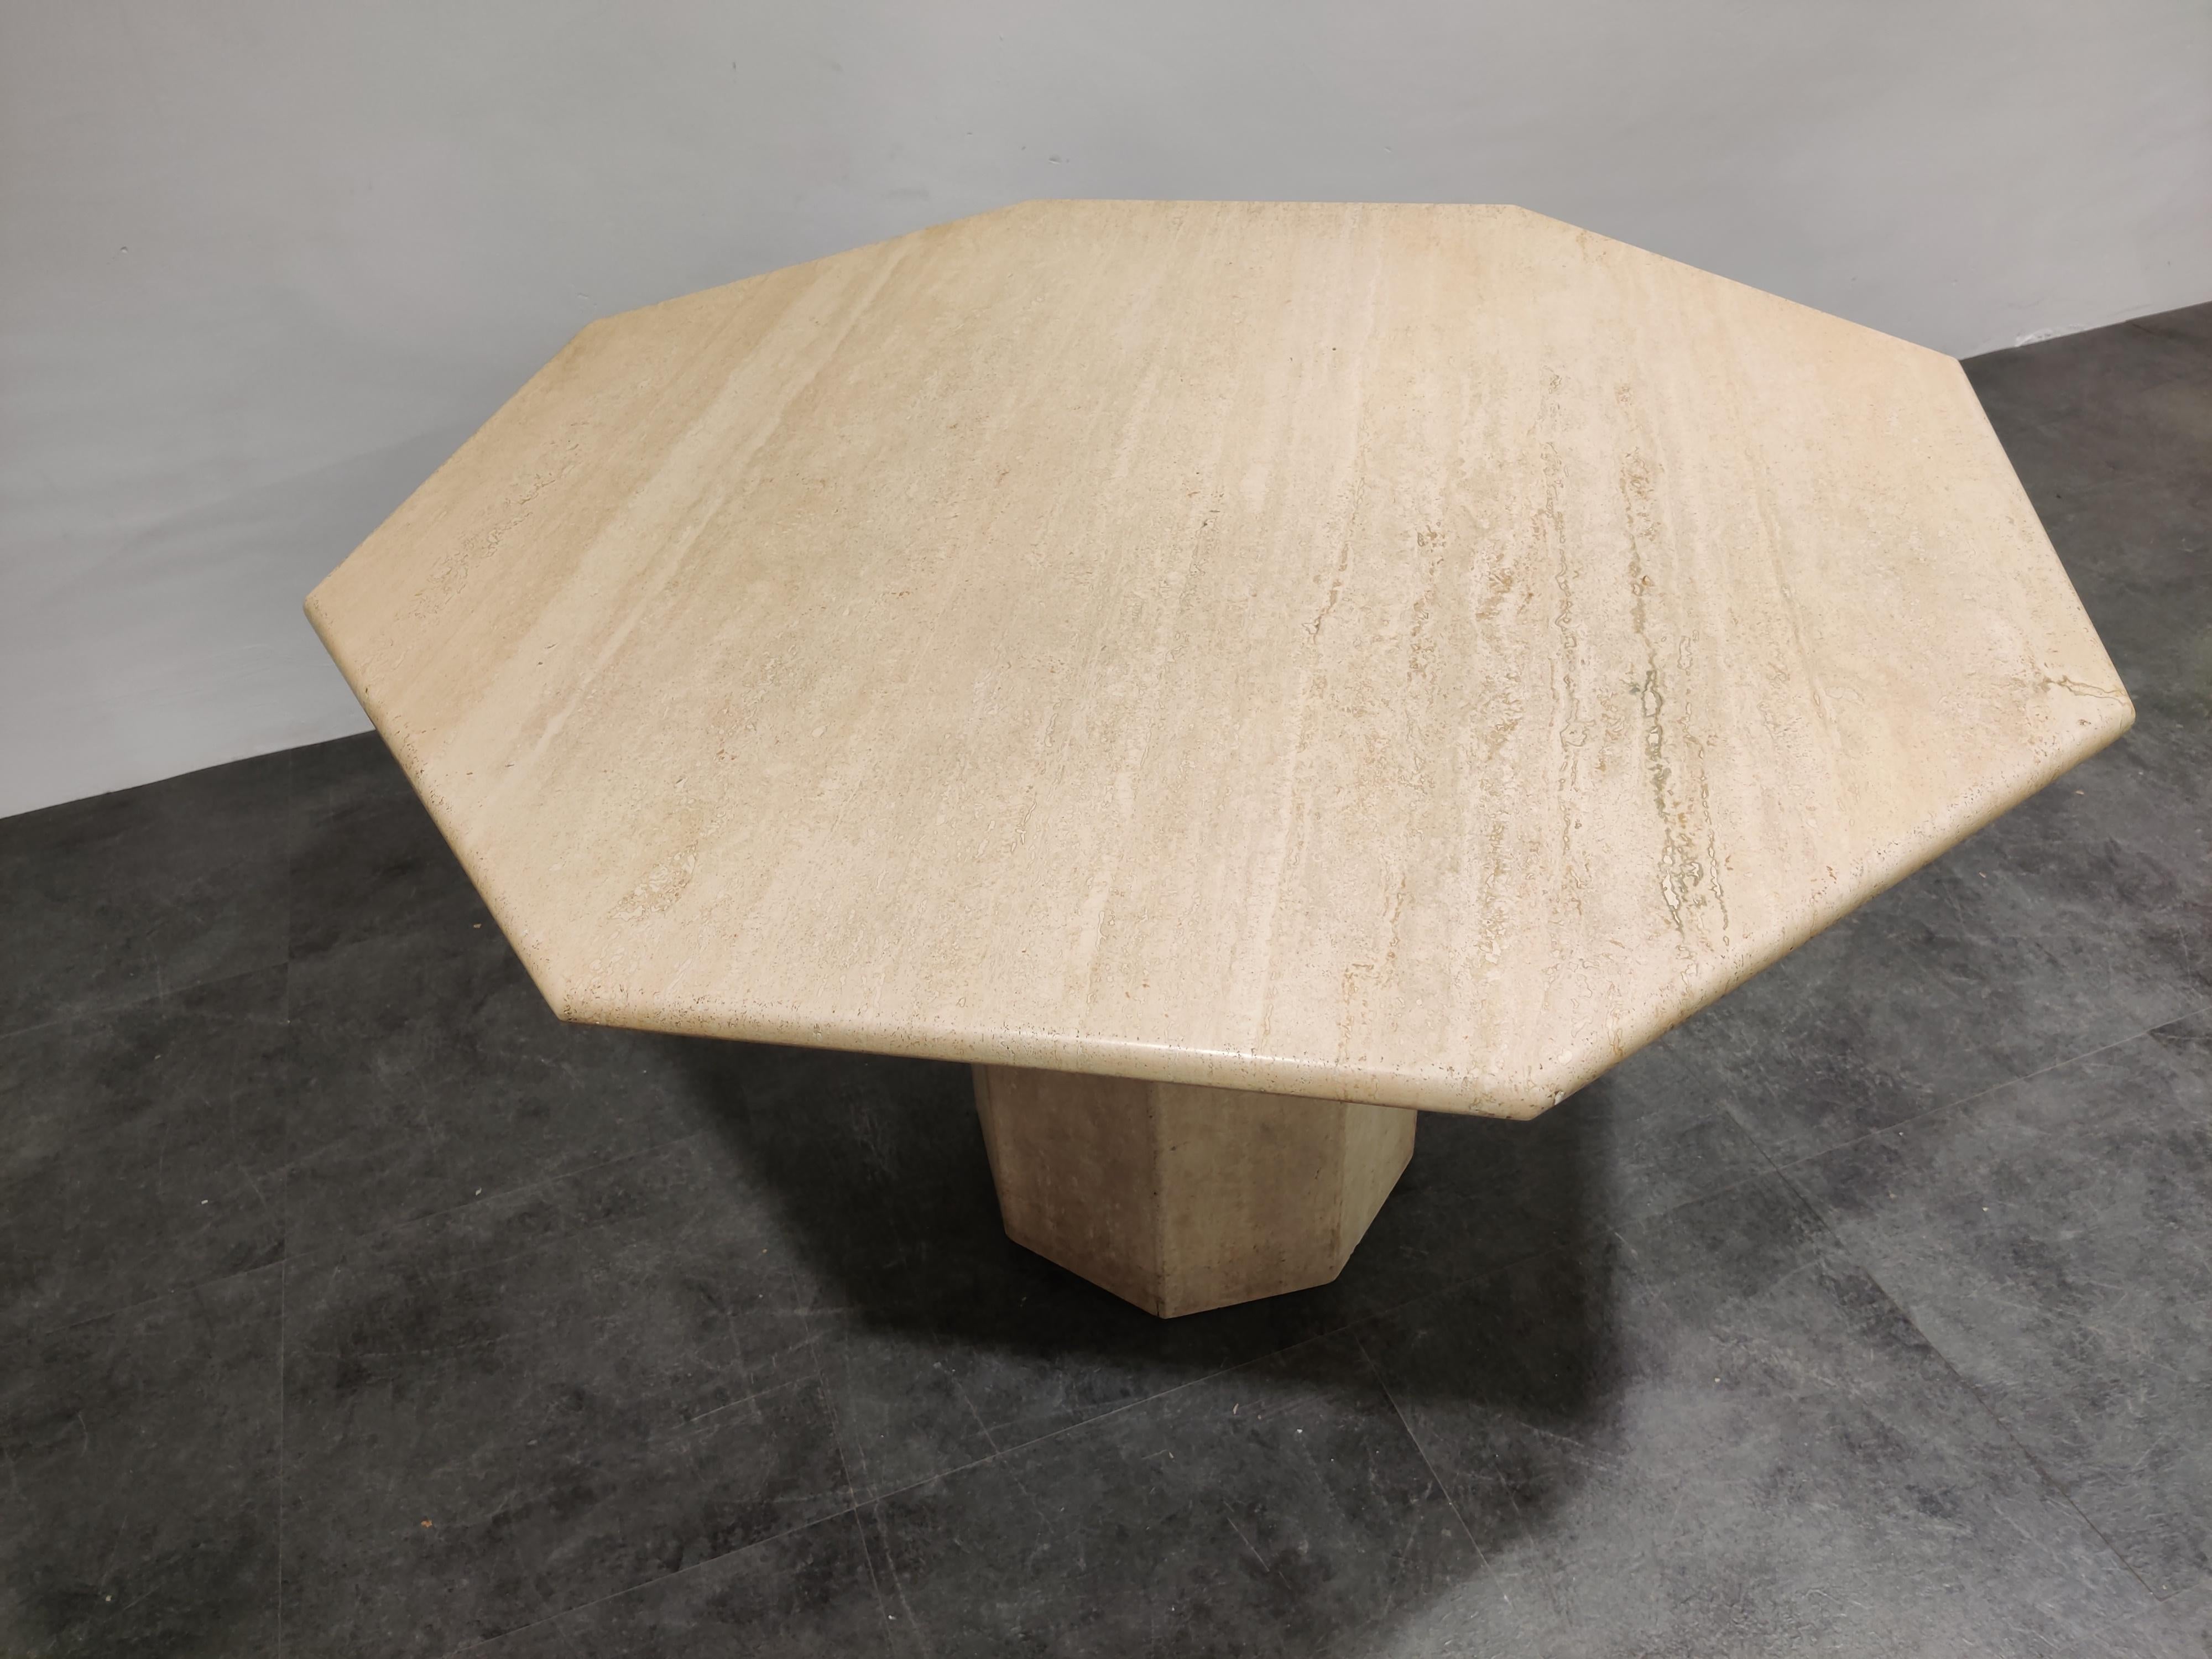 Beautiful dining table made from travertine stone with an octogonal base and top.

Nicely finished top.

Can be combined with many interior styles.

Good condition, normal wear. 

1970s, Italy

Measures: Height 74cm/29.13